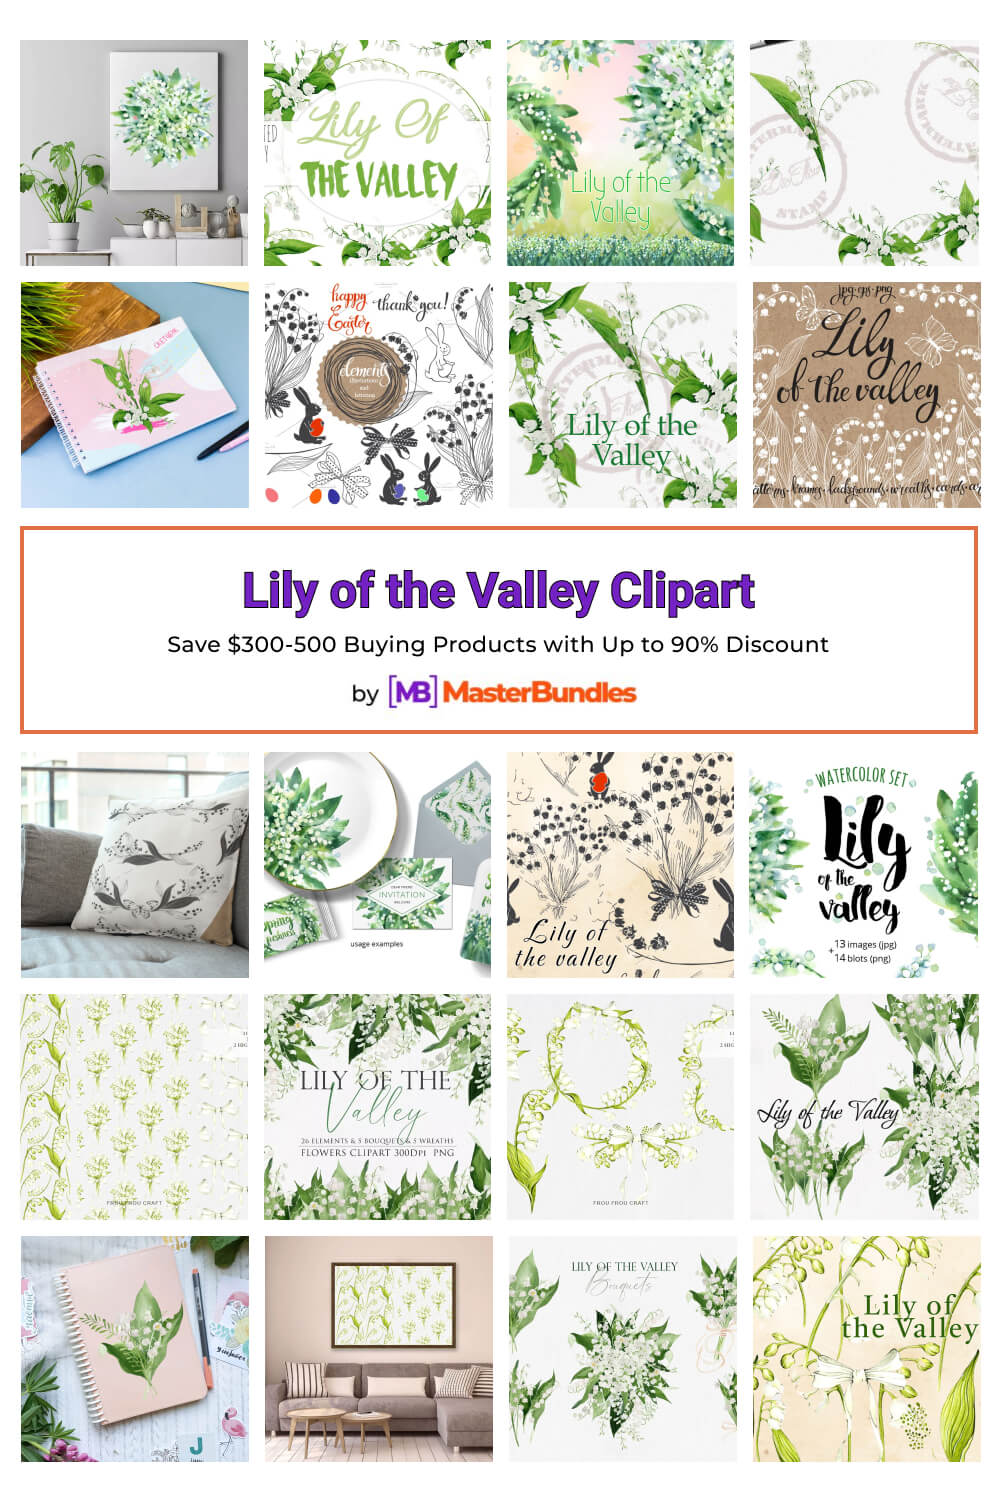 lily of the valley clipart pinterest image.